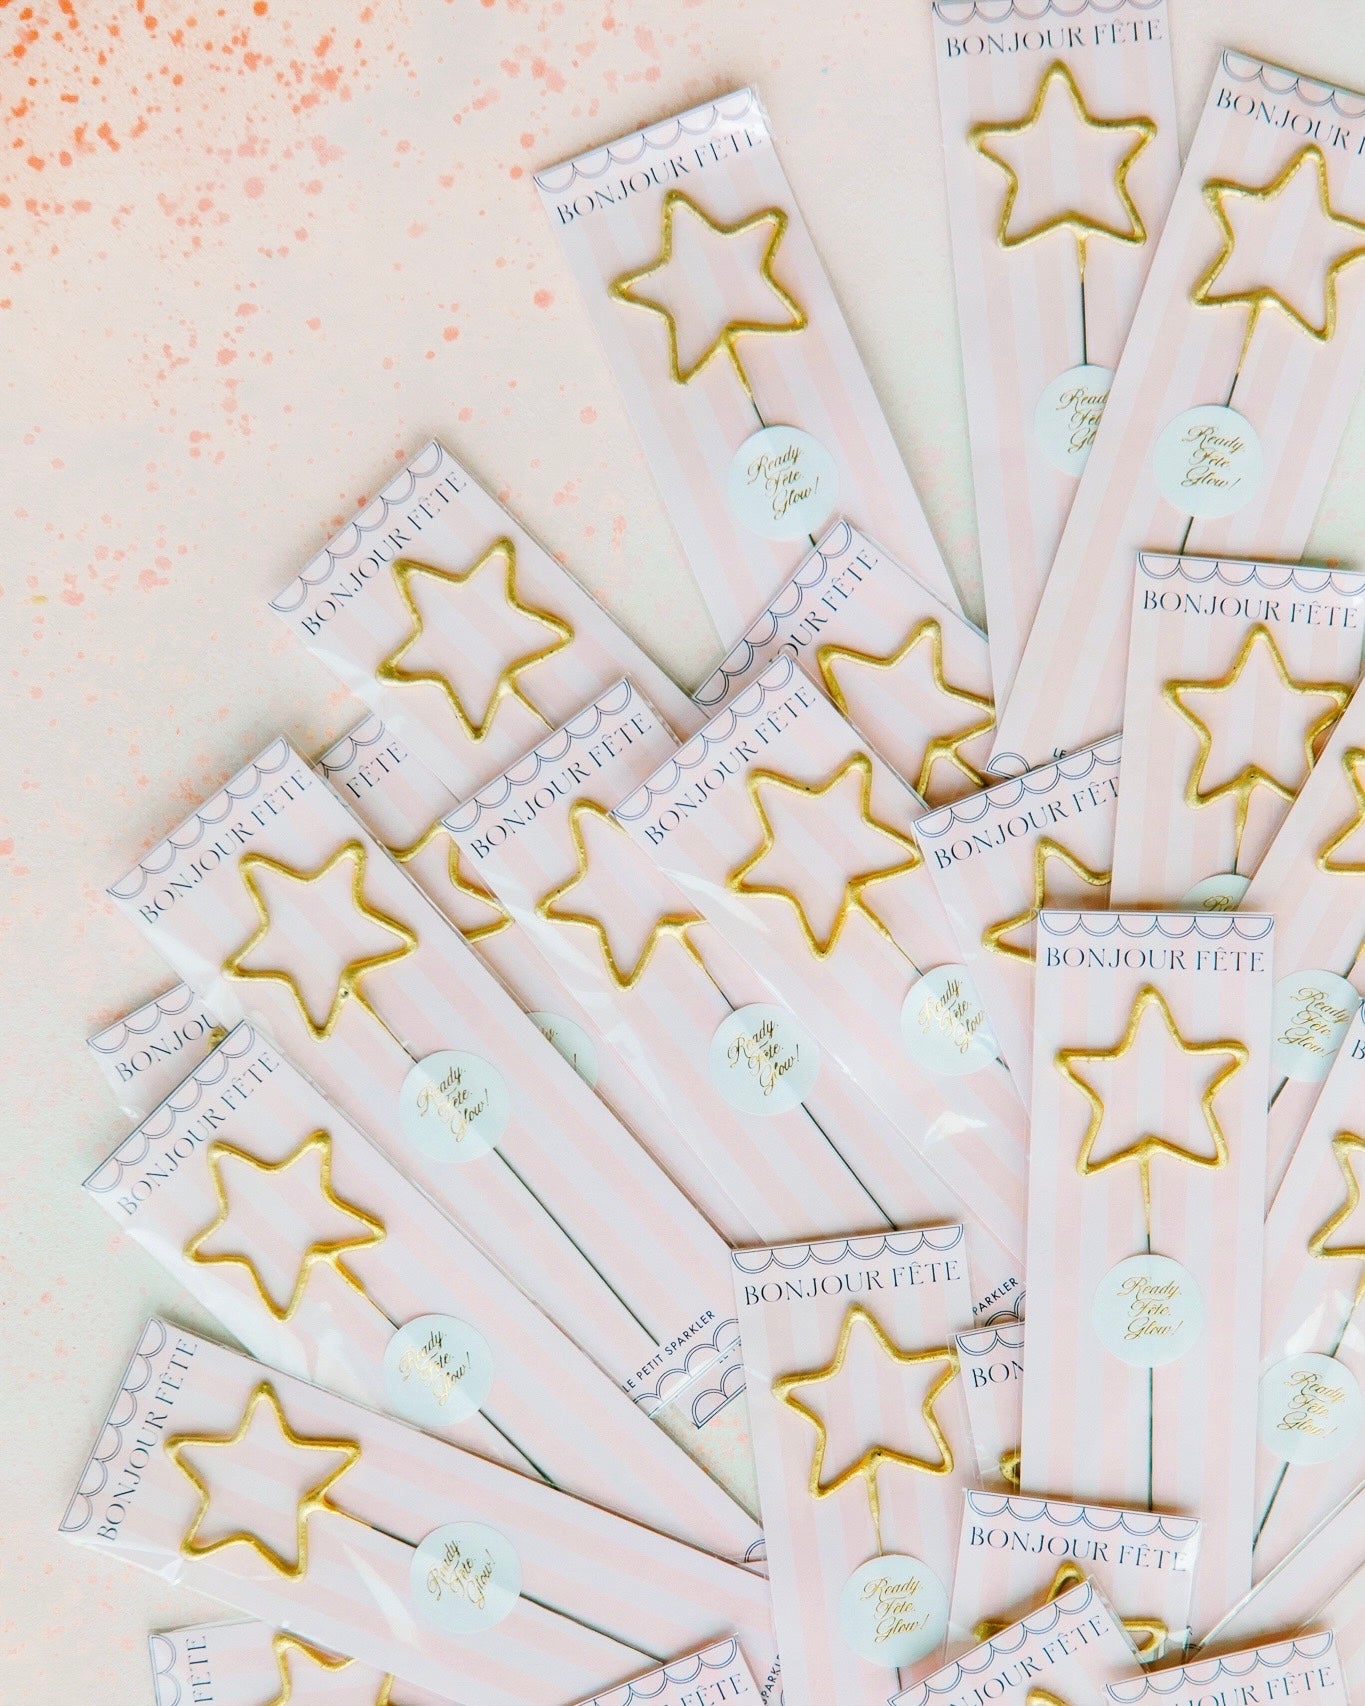 Star-shaped sparklers for New Year's Eve.